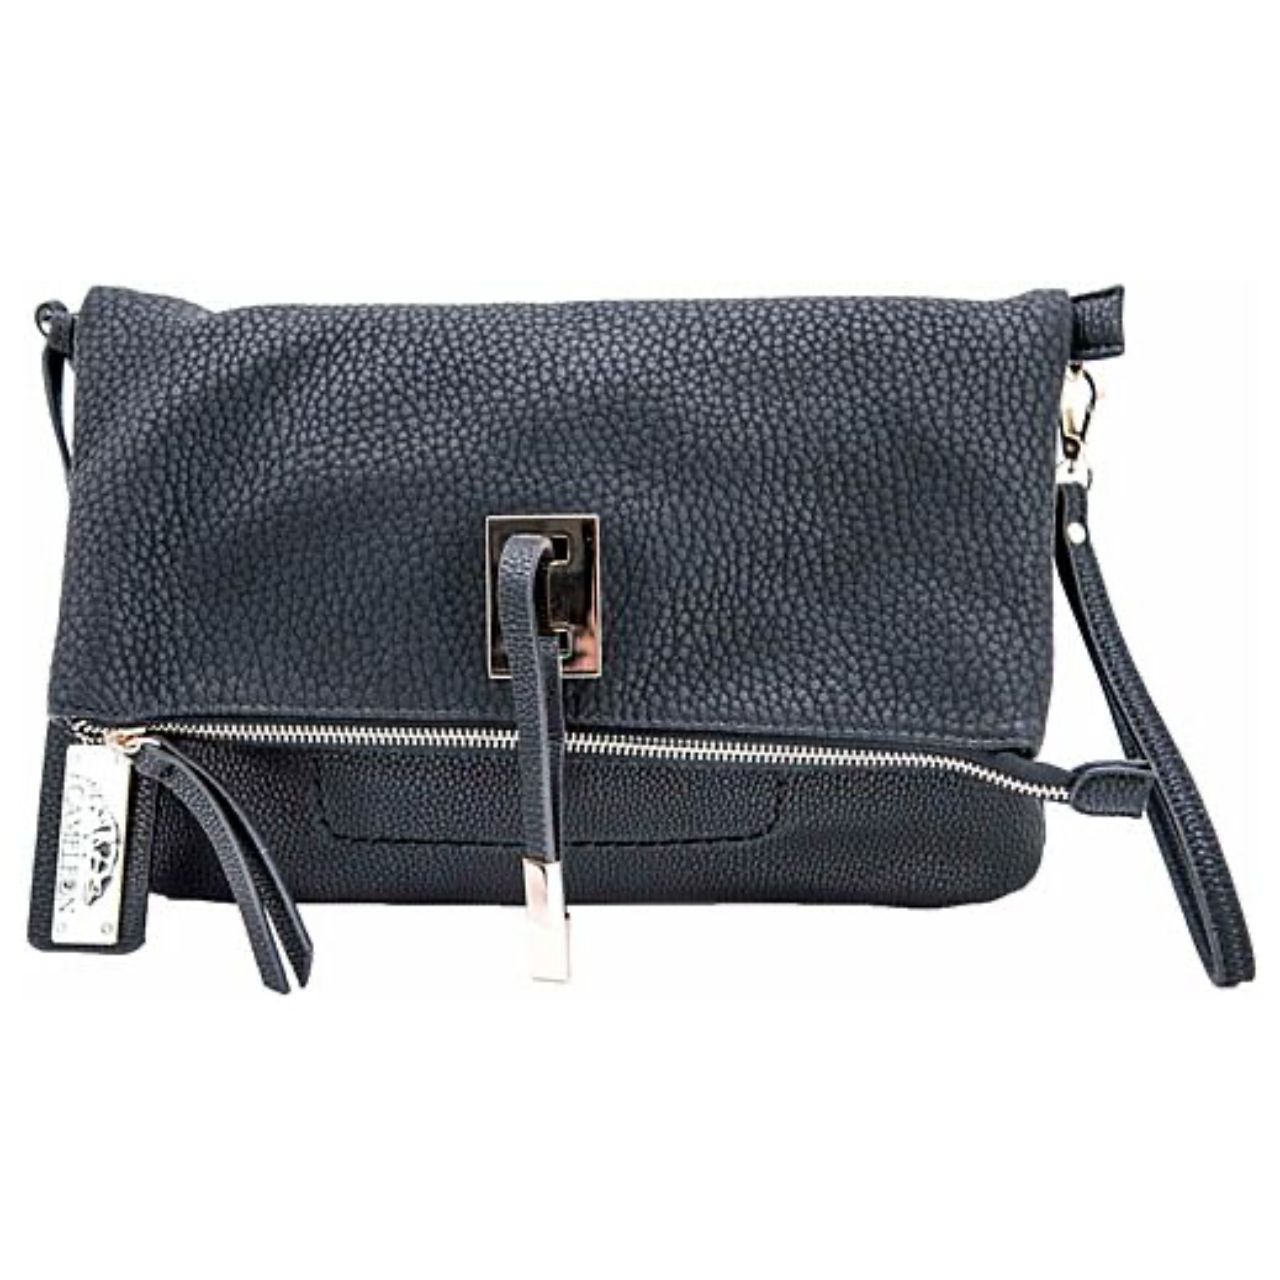 CAMELEON "Aya" concealed carry purse